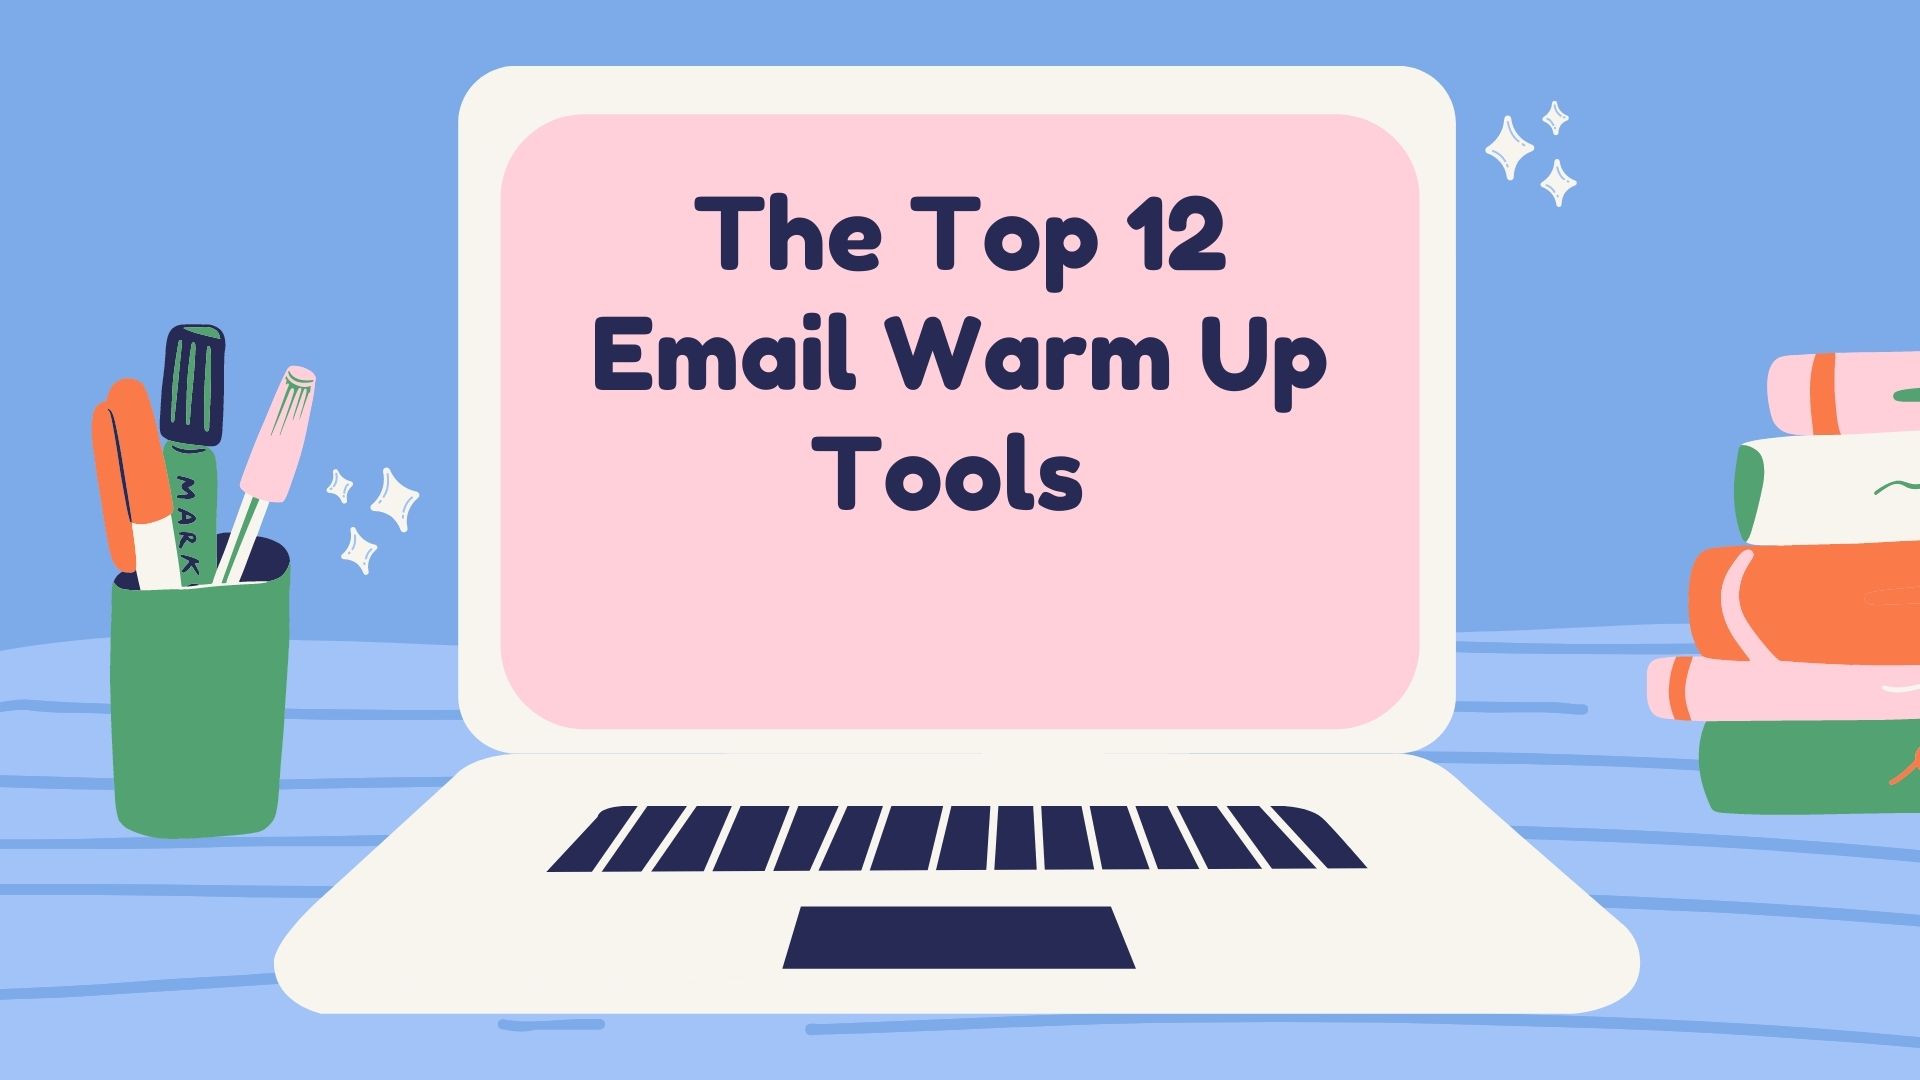 The Best Email Warm Up Tools – Review The Top 12